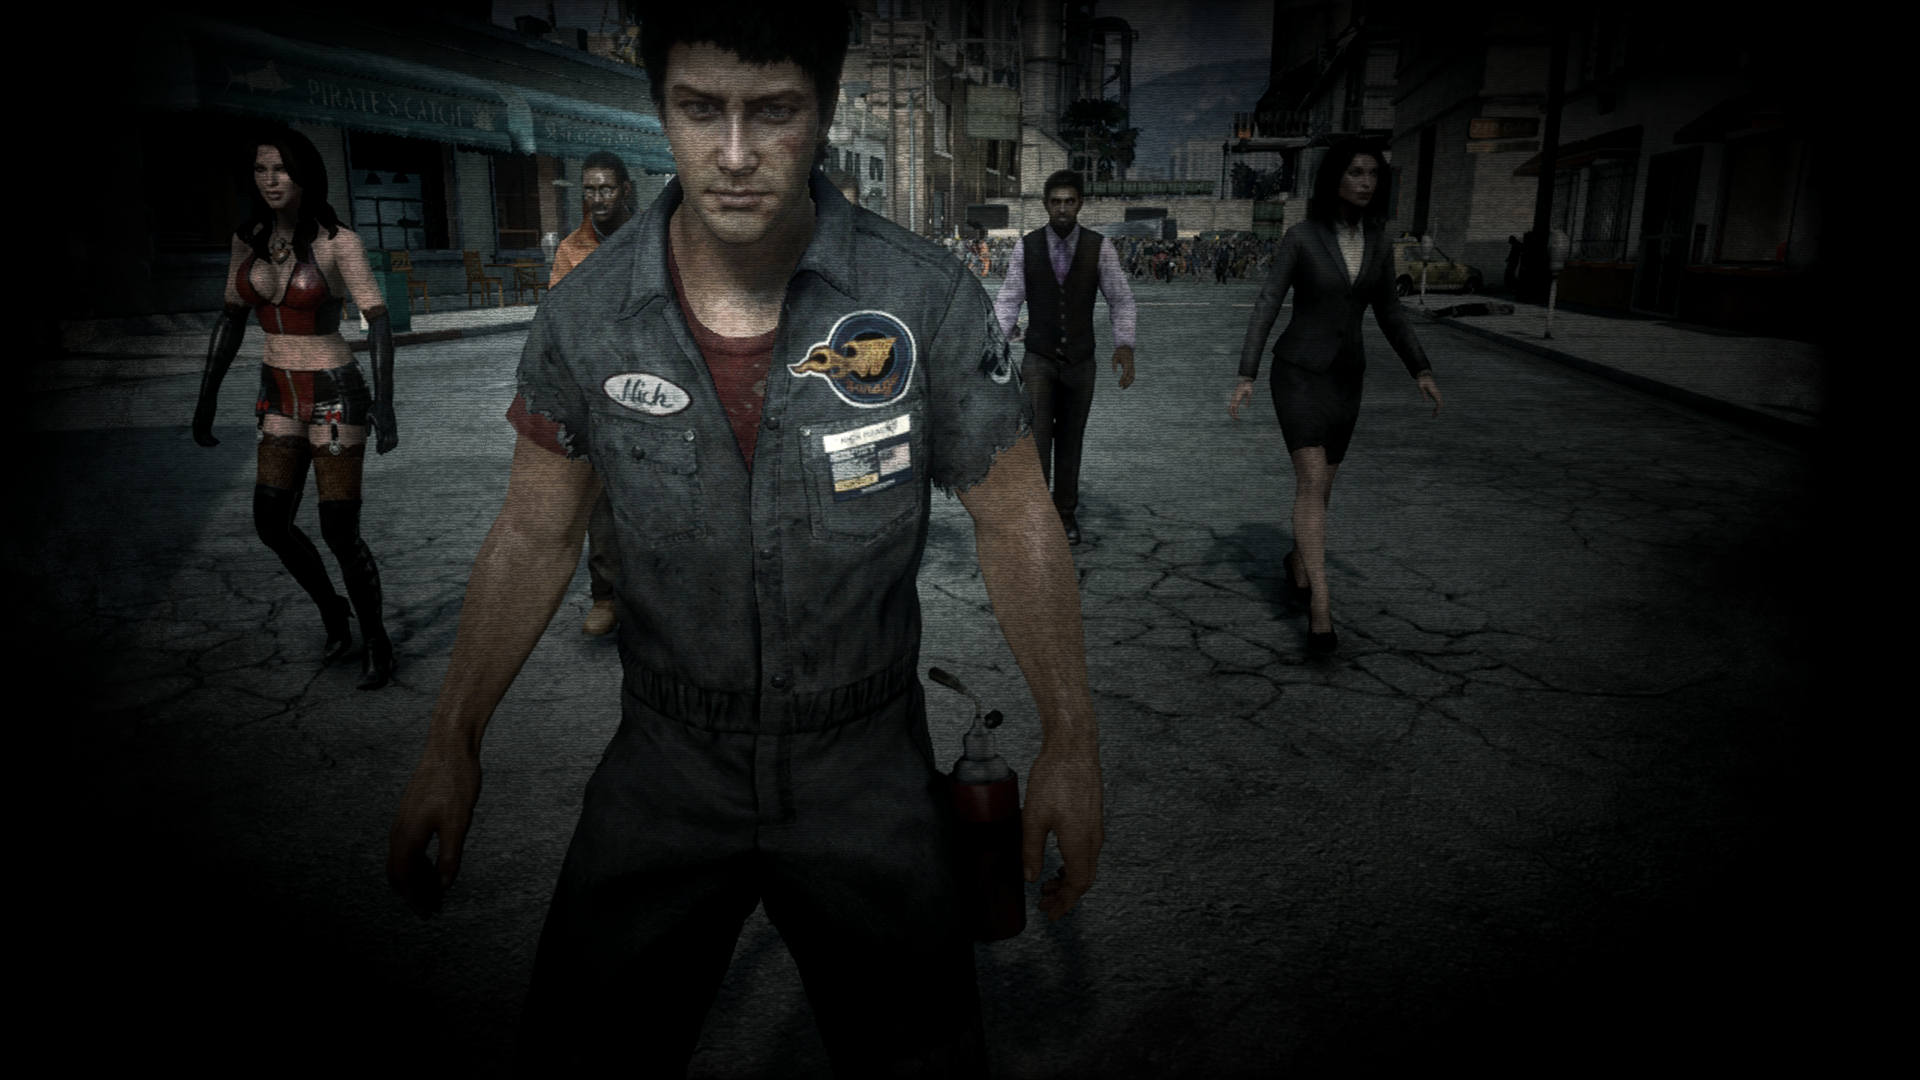 Dead Rising 3 [Part 4] - Get It On, Bang a Gong 